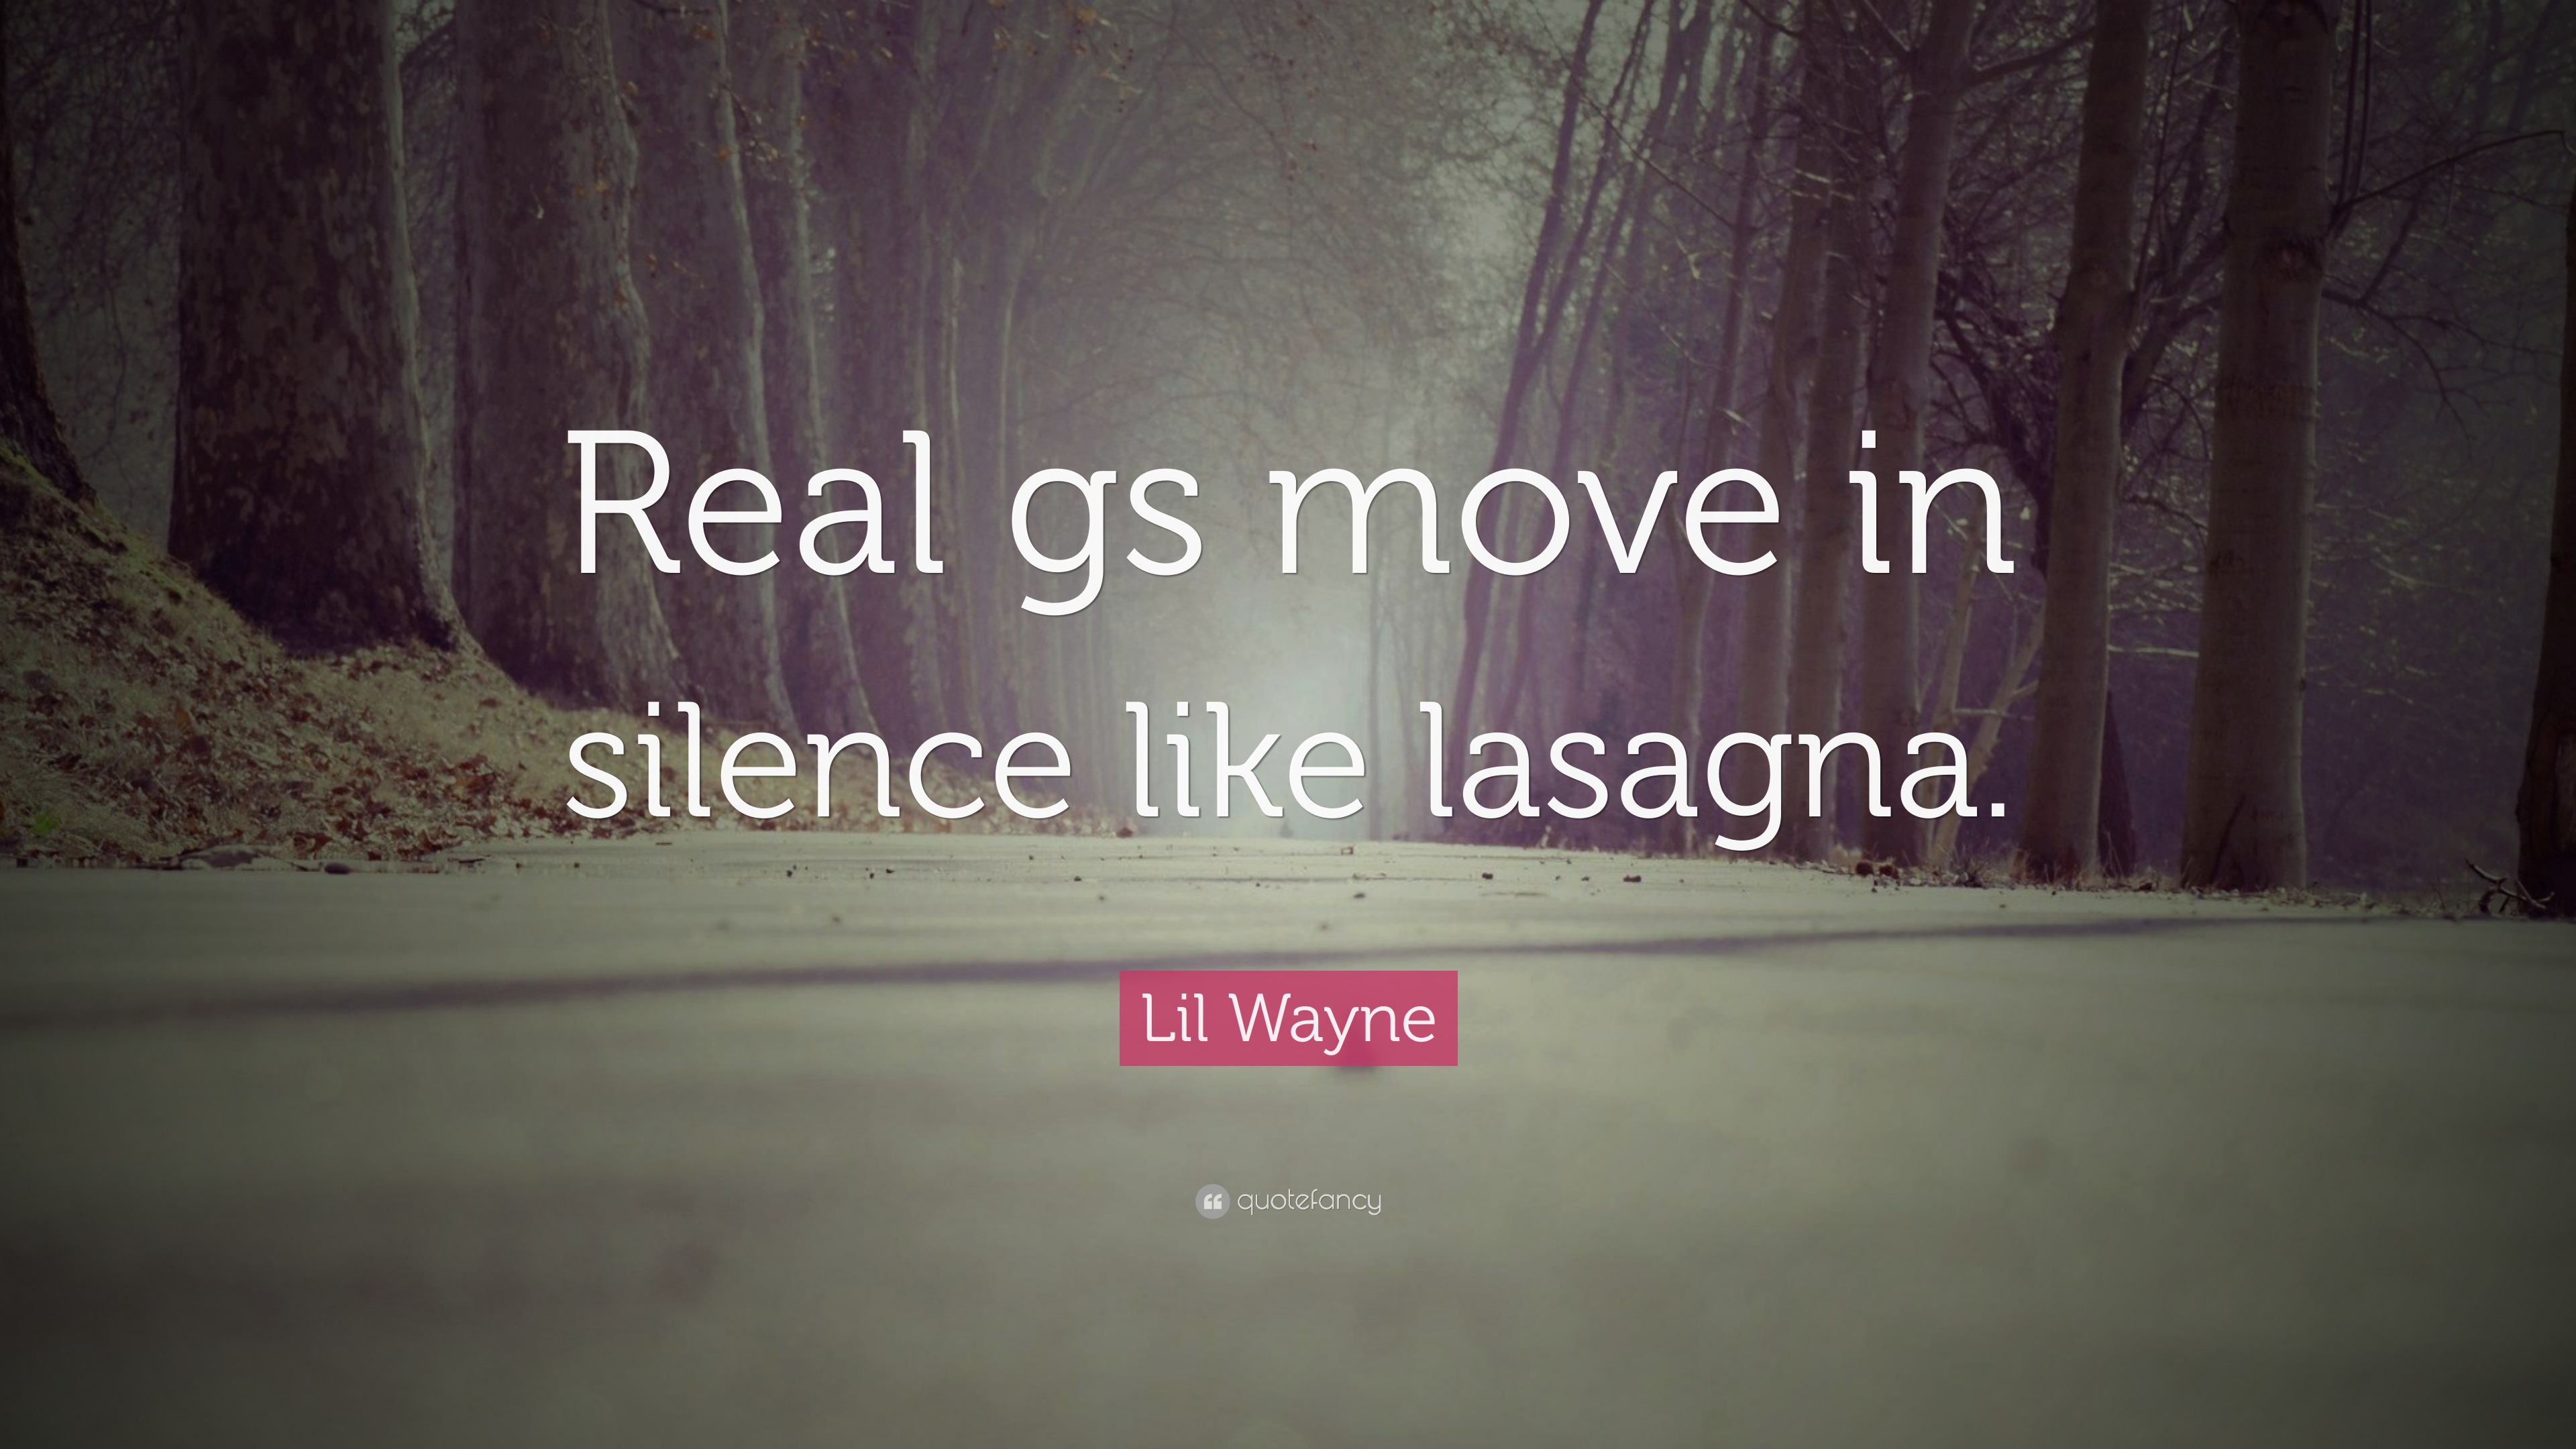 real gs move in silence like lasagna baker